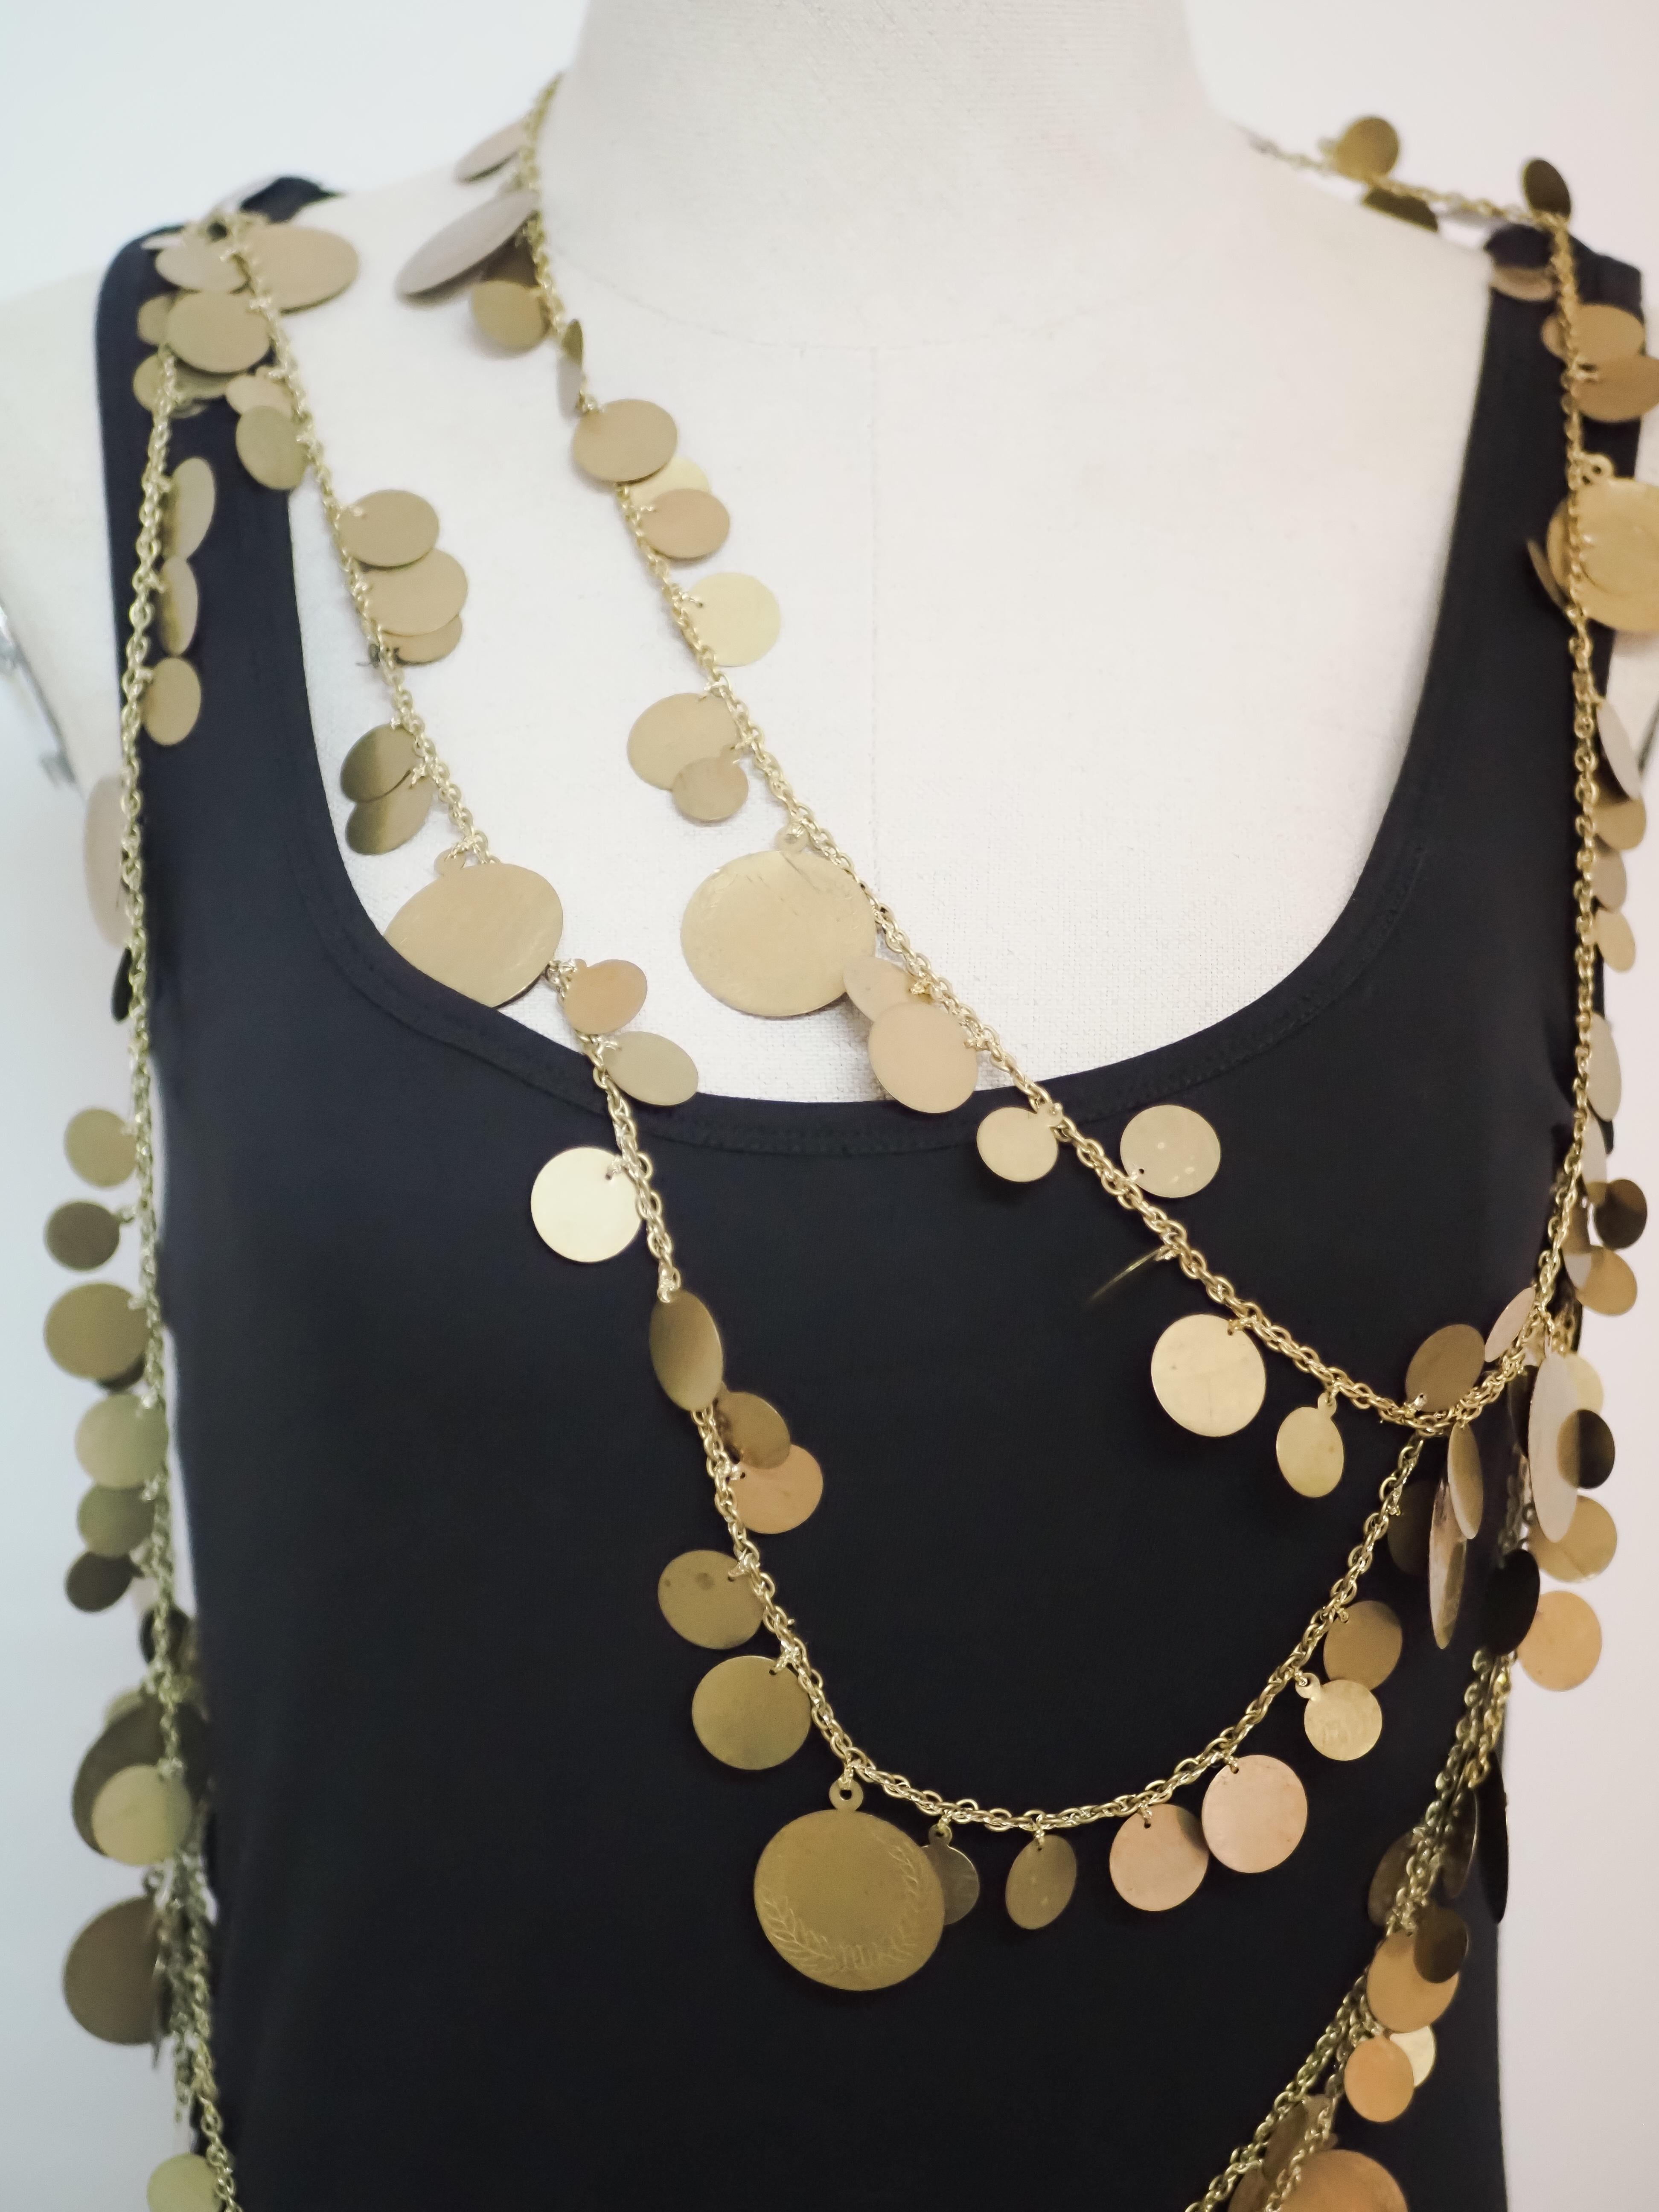 Givenchy black tank top with gold medals all over
size S 